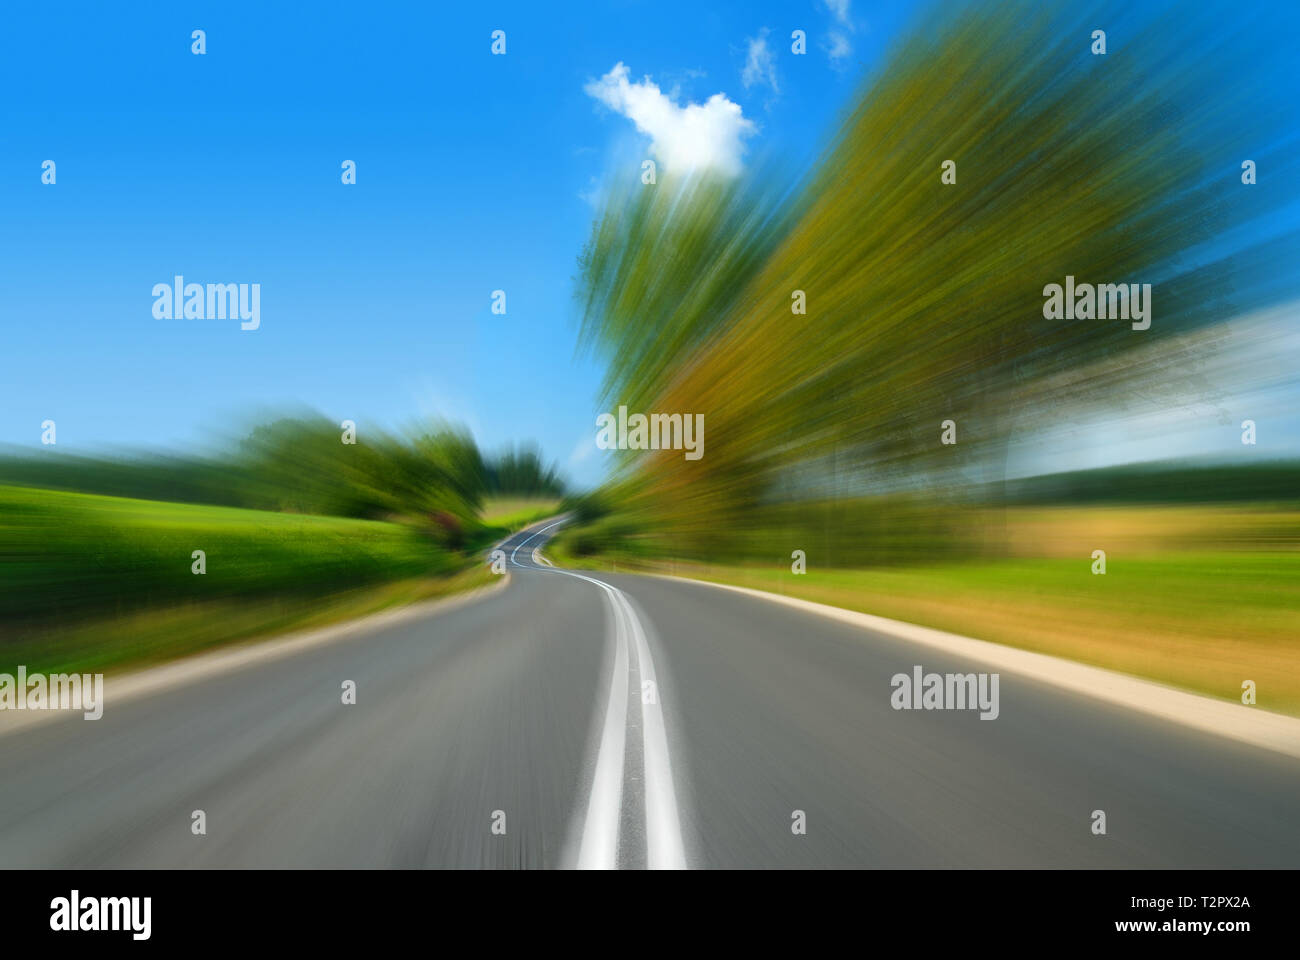 Road among green fields with motion blur effect, blue sky in the background Stock Photo